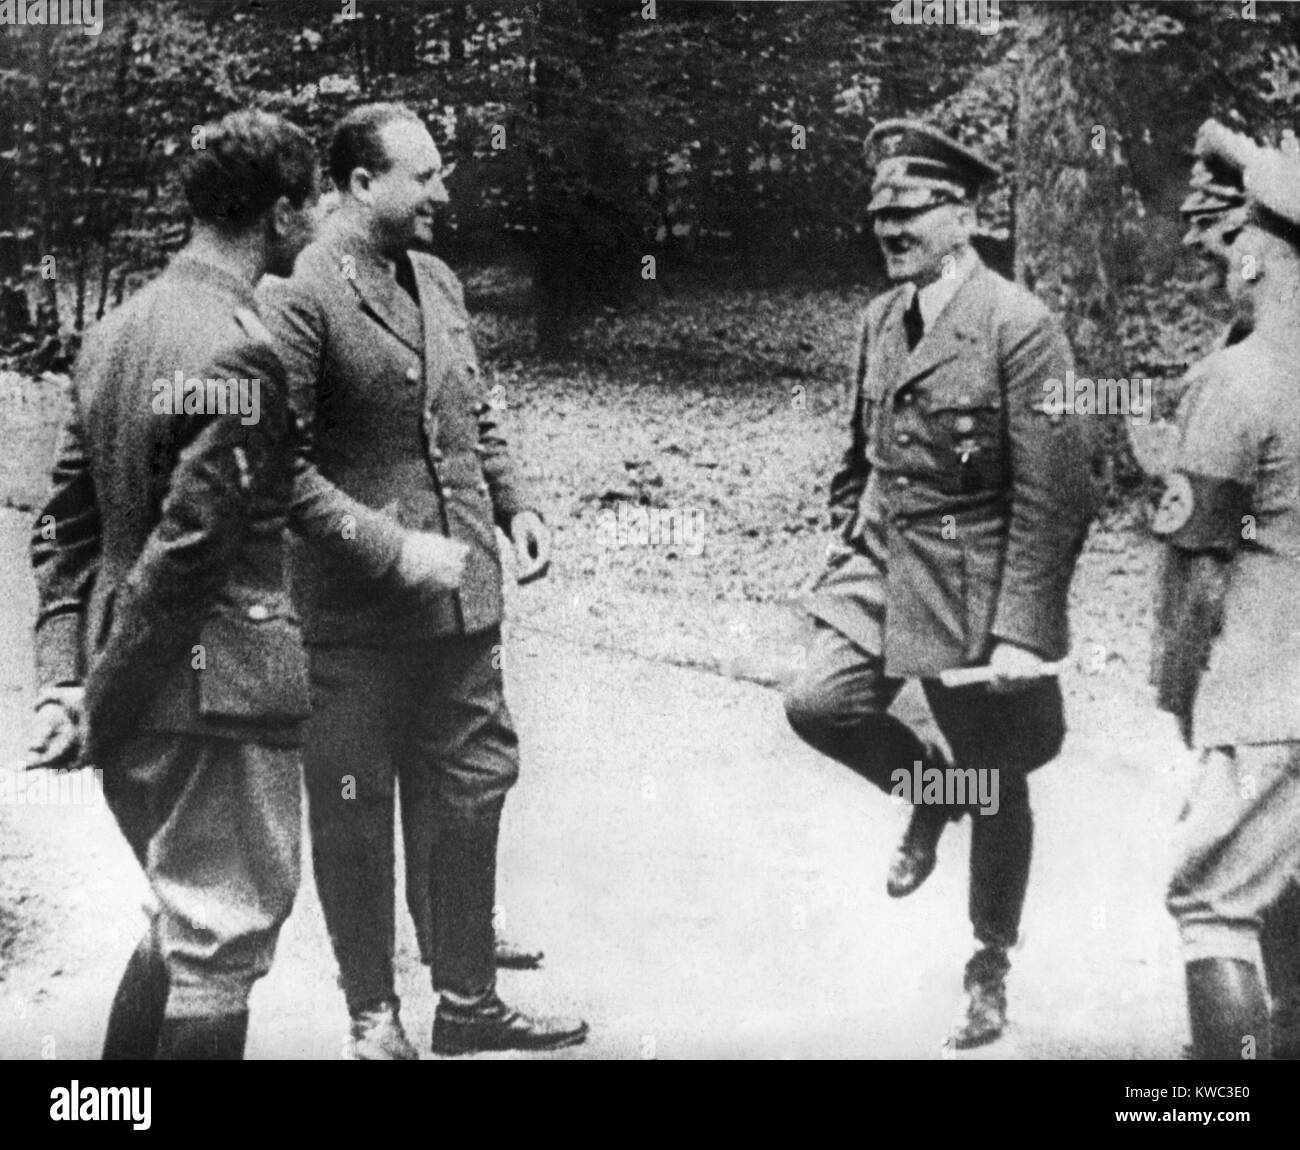 Adolf Hitler happily dances a jig before signing of the World War 2 French Armistice, June 22, 1940.With his staff, Hitler was in Le Francport, Compiegne, where defeated Germany signed the armistice marking their World War 1 defeat on Nov. 11, 1918 (BSLOC 2015 13 63) Stock Photo